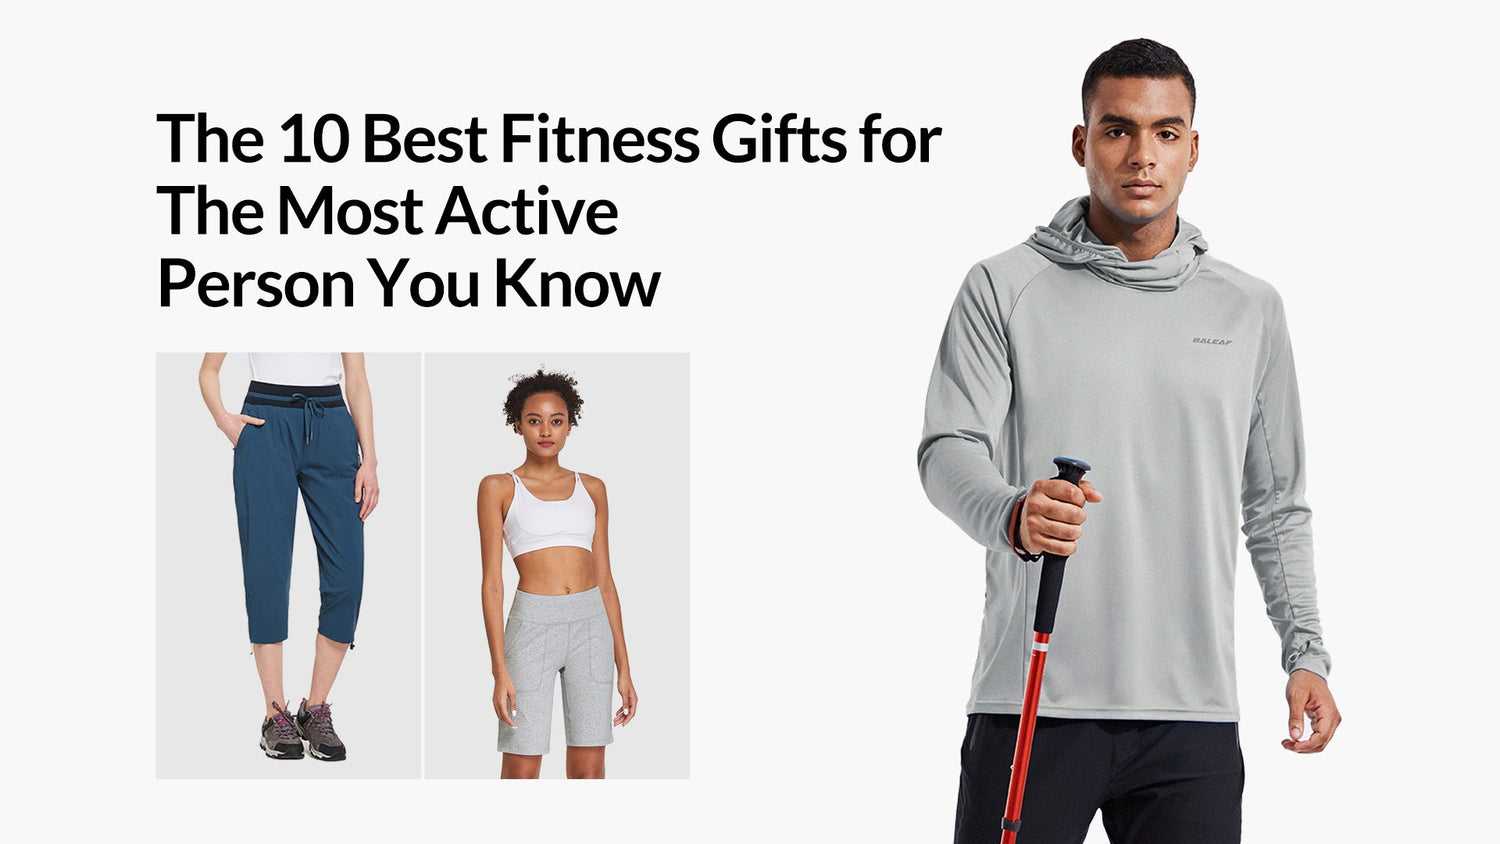 The 10 Best Fitness Gifts for The Most Active Person You Know